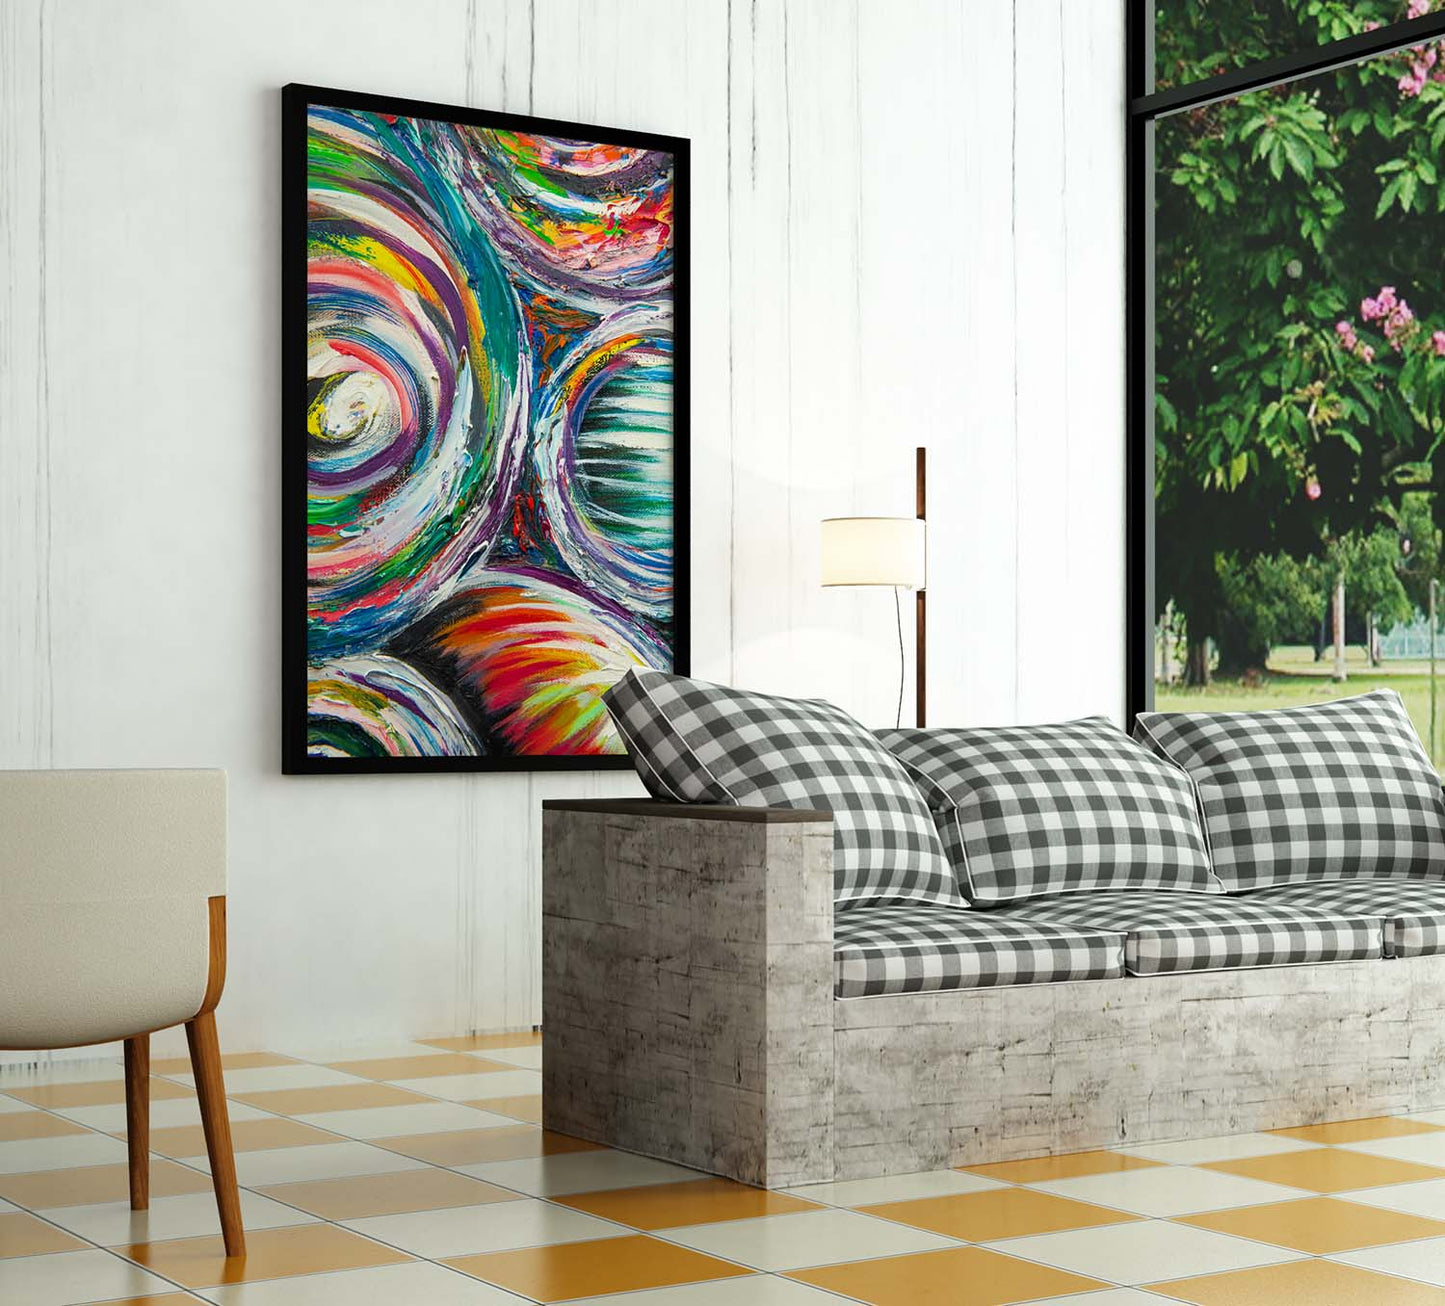 Vid-19 Quintescent abstract art print by Doug LaRue on a wall behind a couch near a window